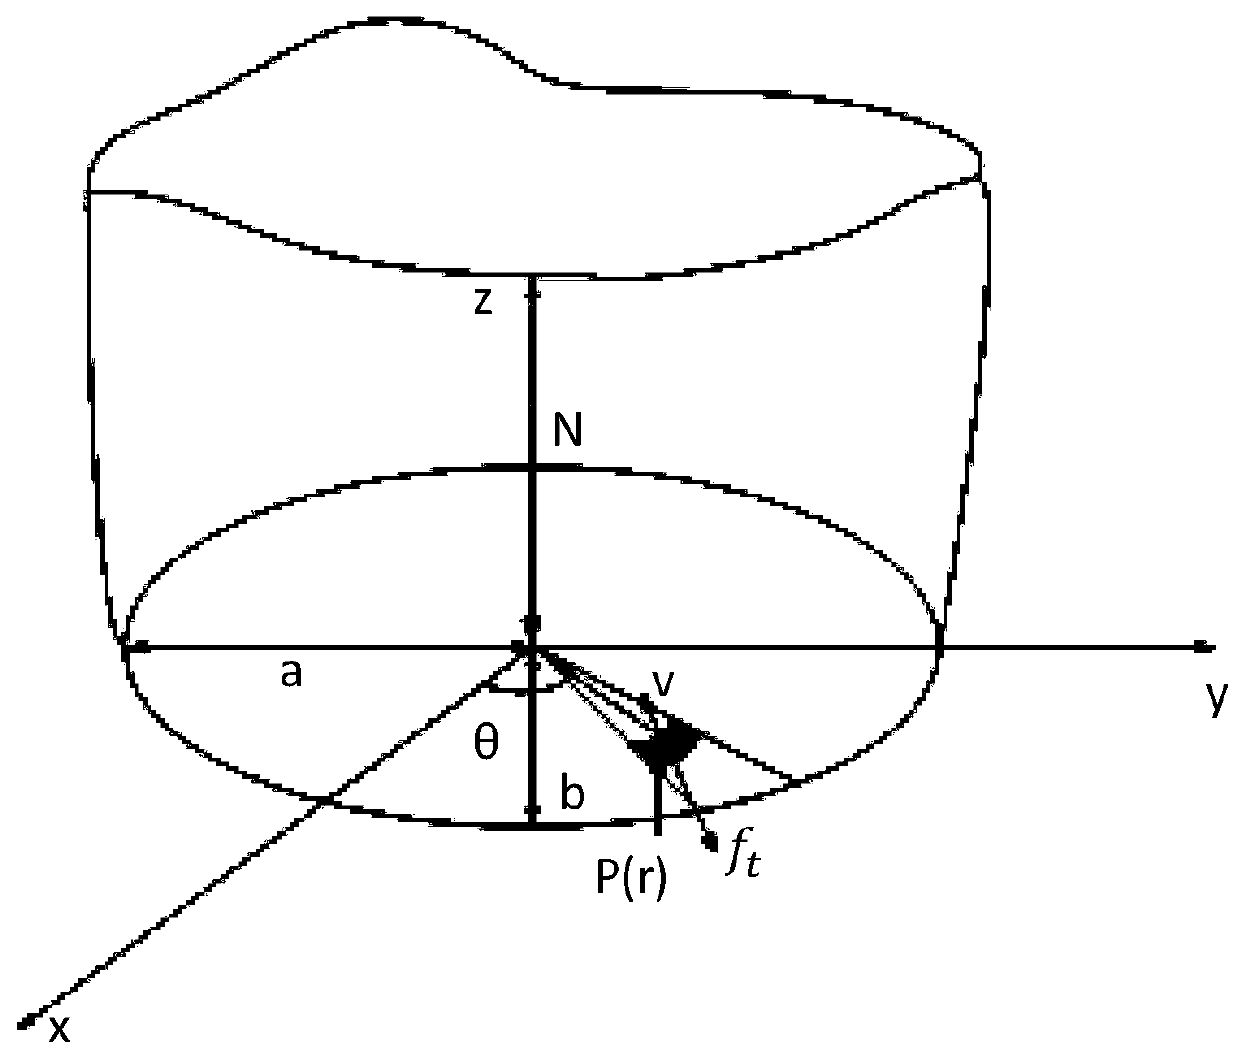 Object grabbing method based on oval surface contact